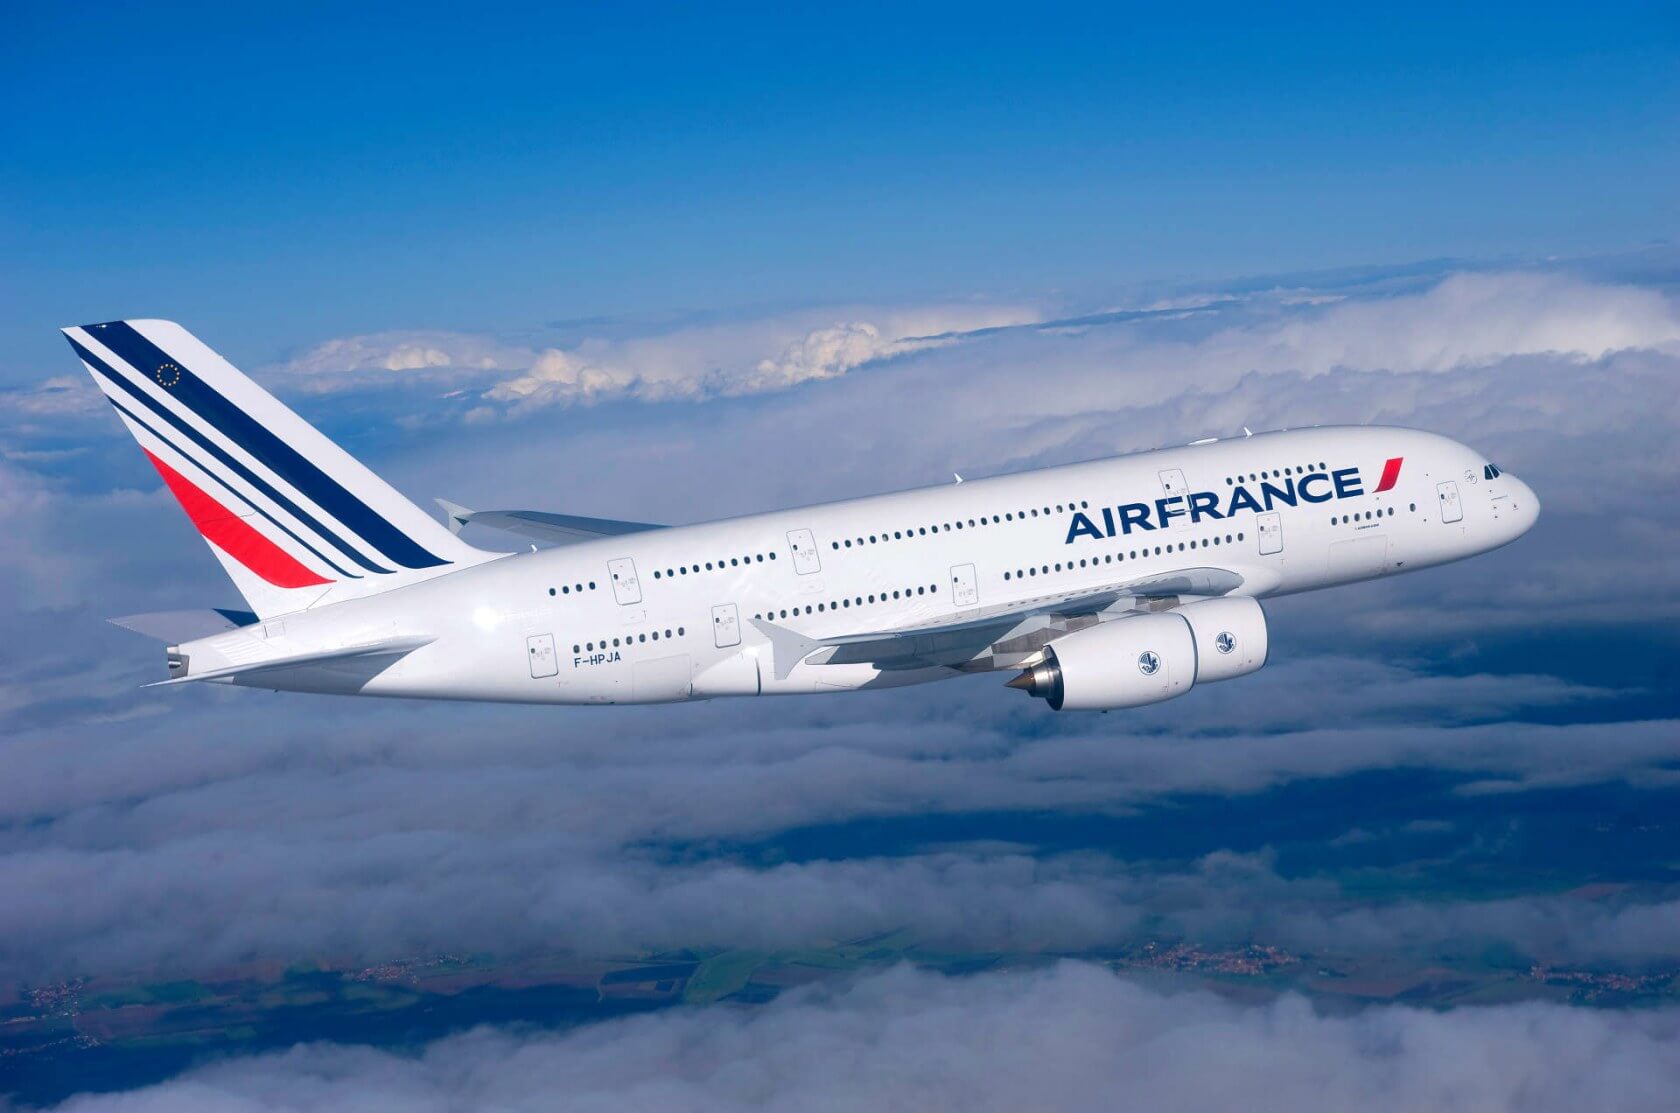 Air France plans to experiment with using facial recognition in place of boarding passes